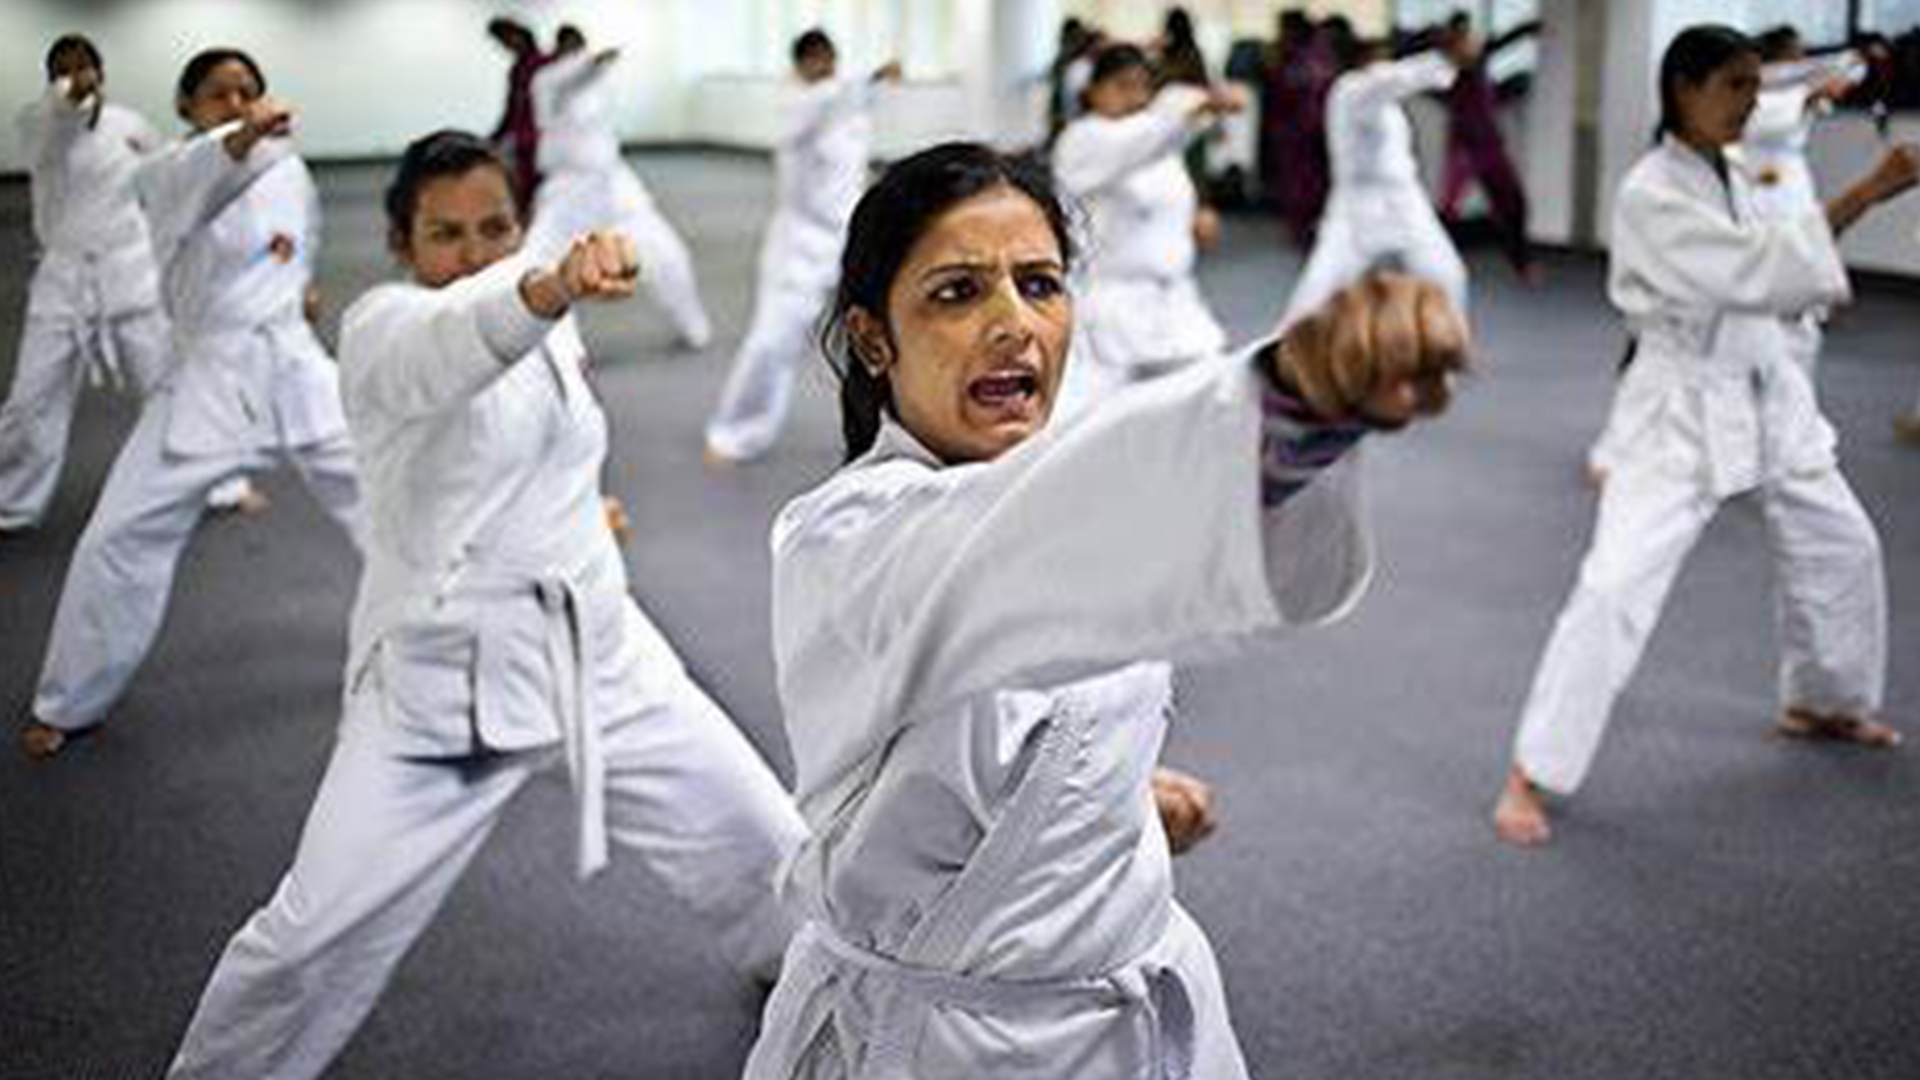 Indian women take up self-defense classes amid rise in sexual crimes - CGTN